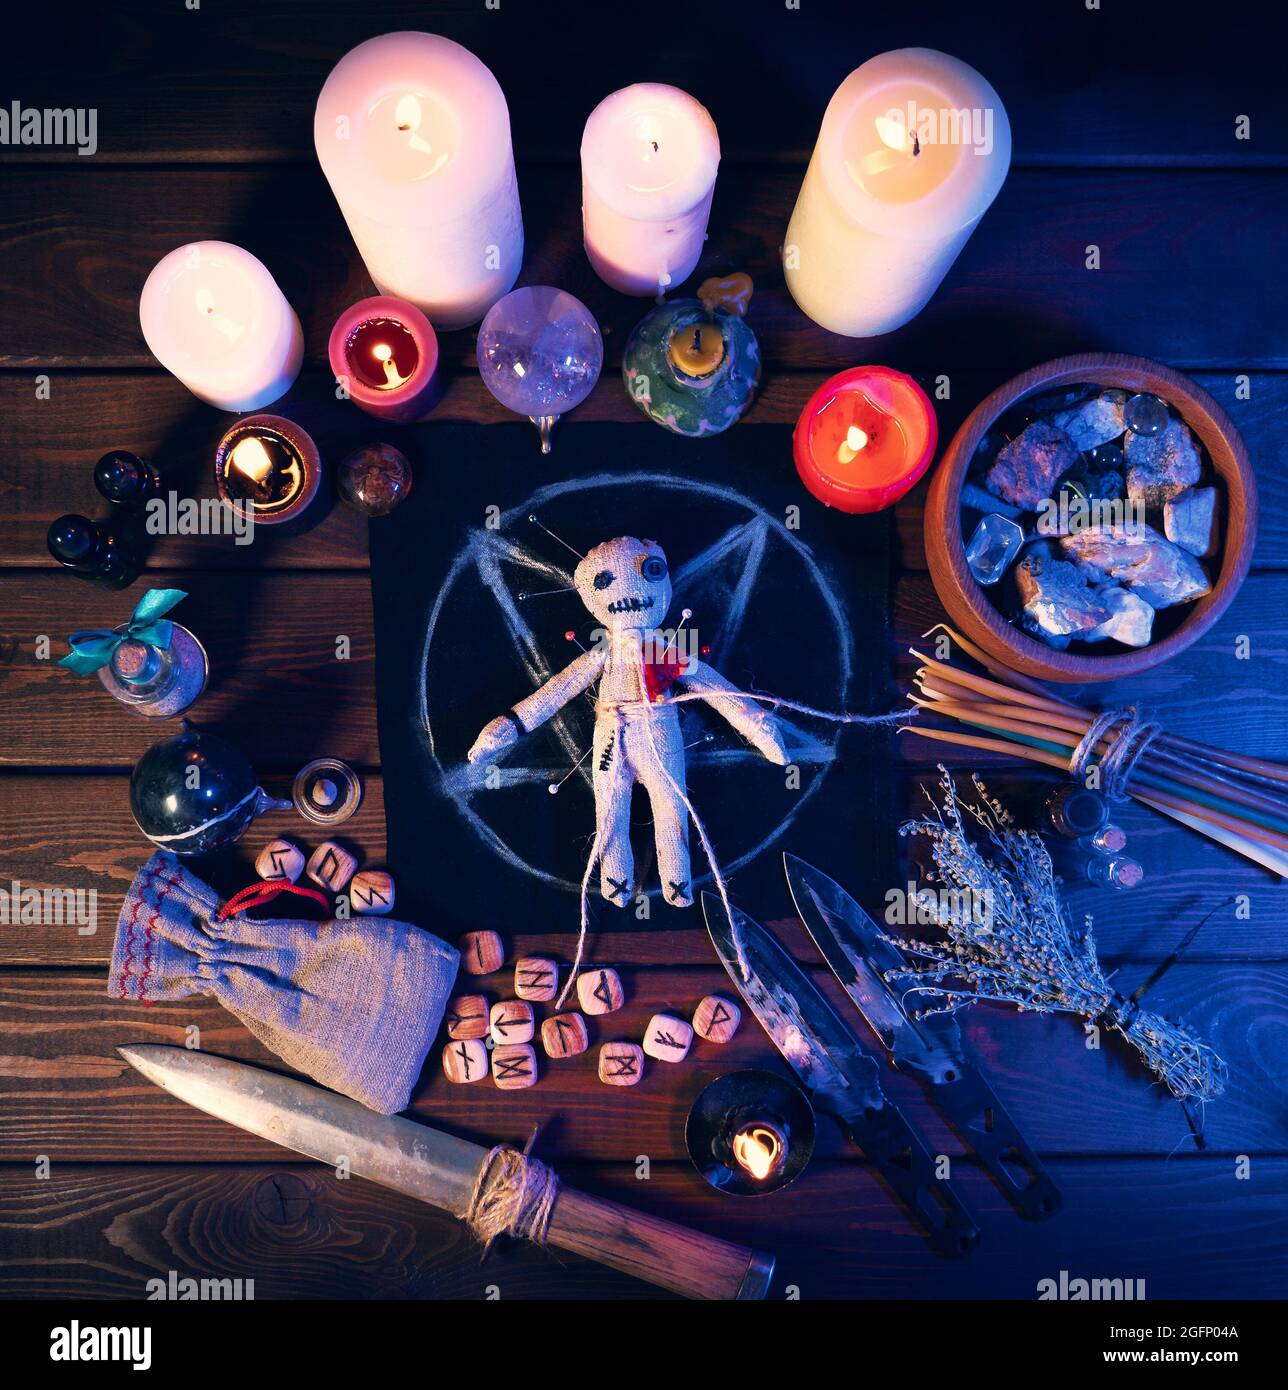 Creepy voodoo doll on dark scary spiritual wizardry table with candles and  magic attributes for halloween sorcery and curse Stock Photo - Alamy